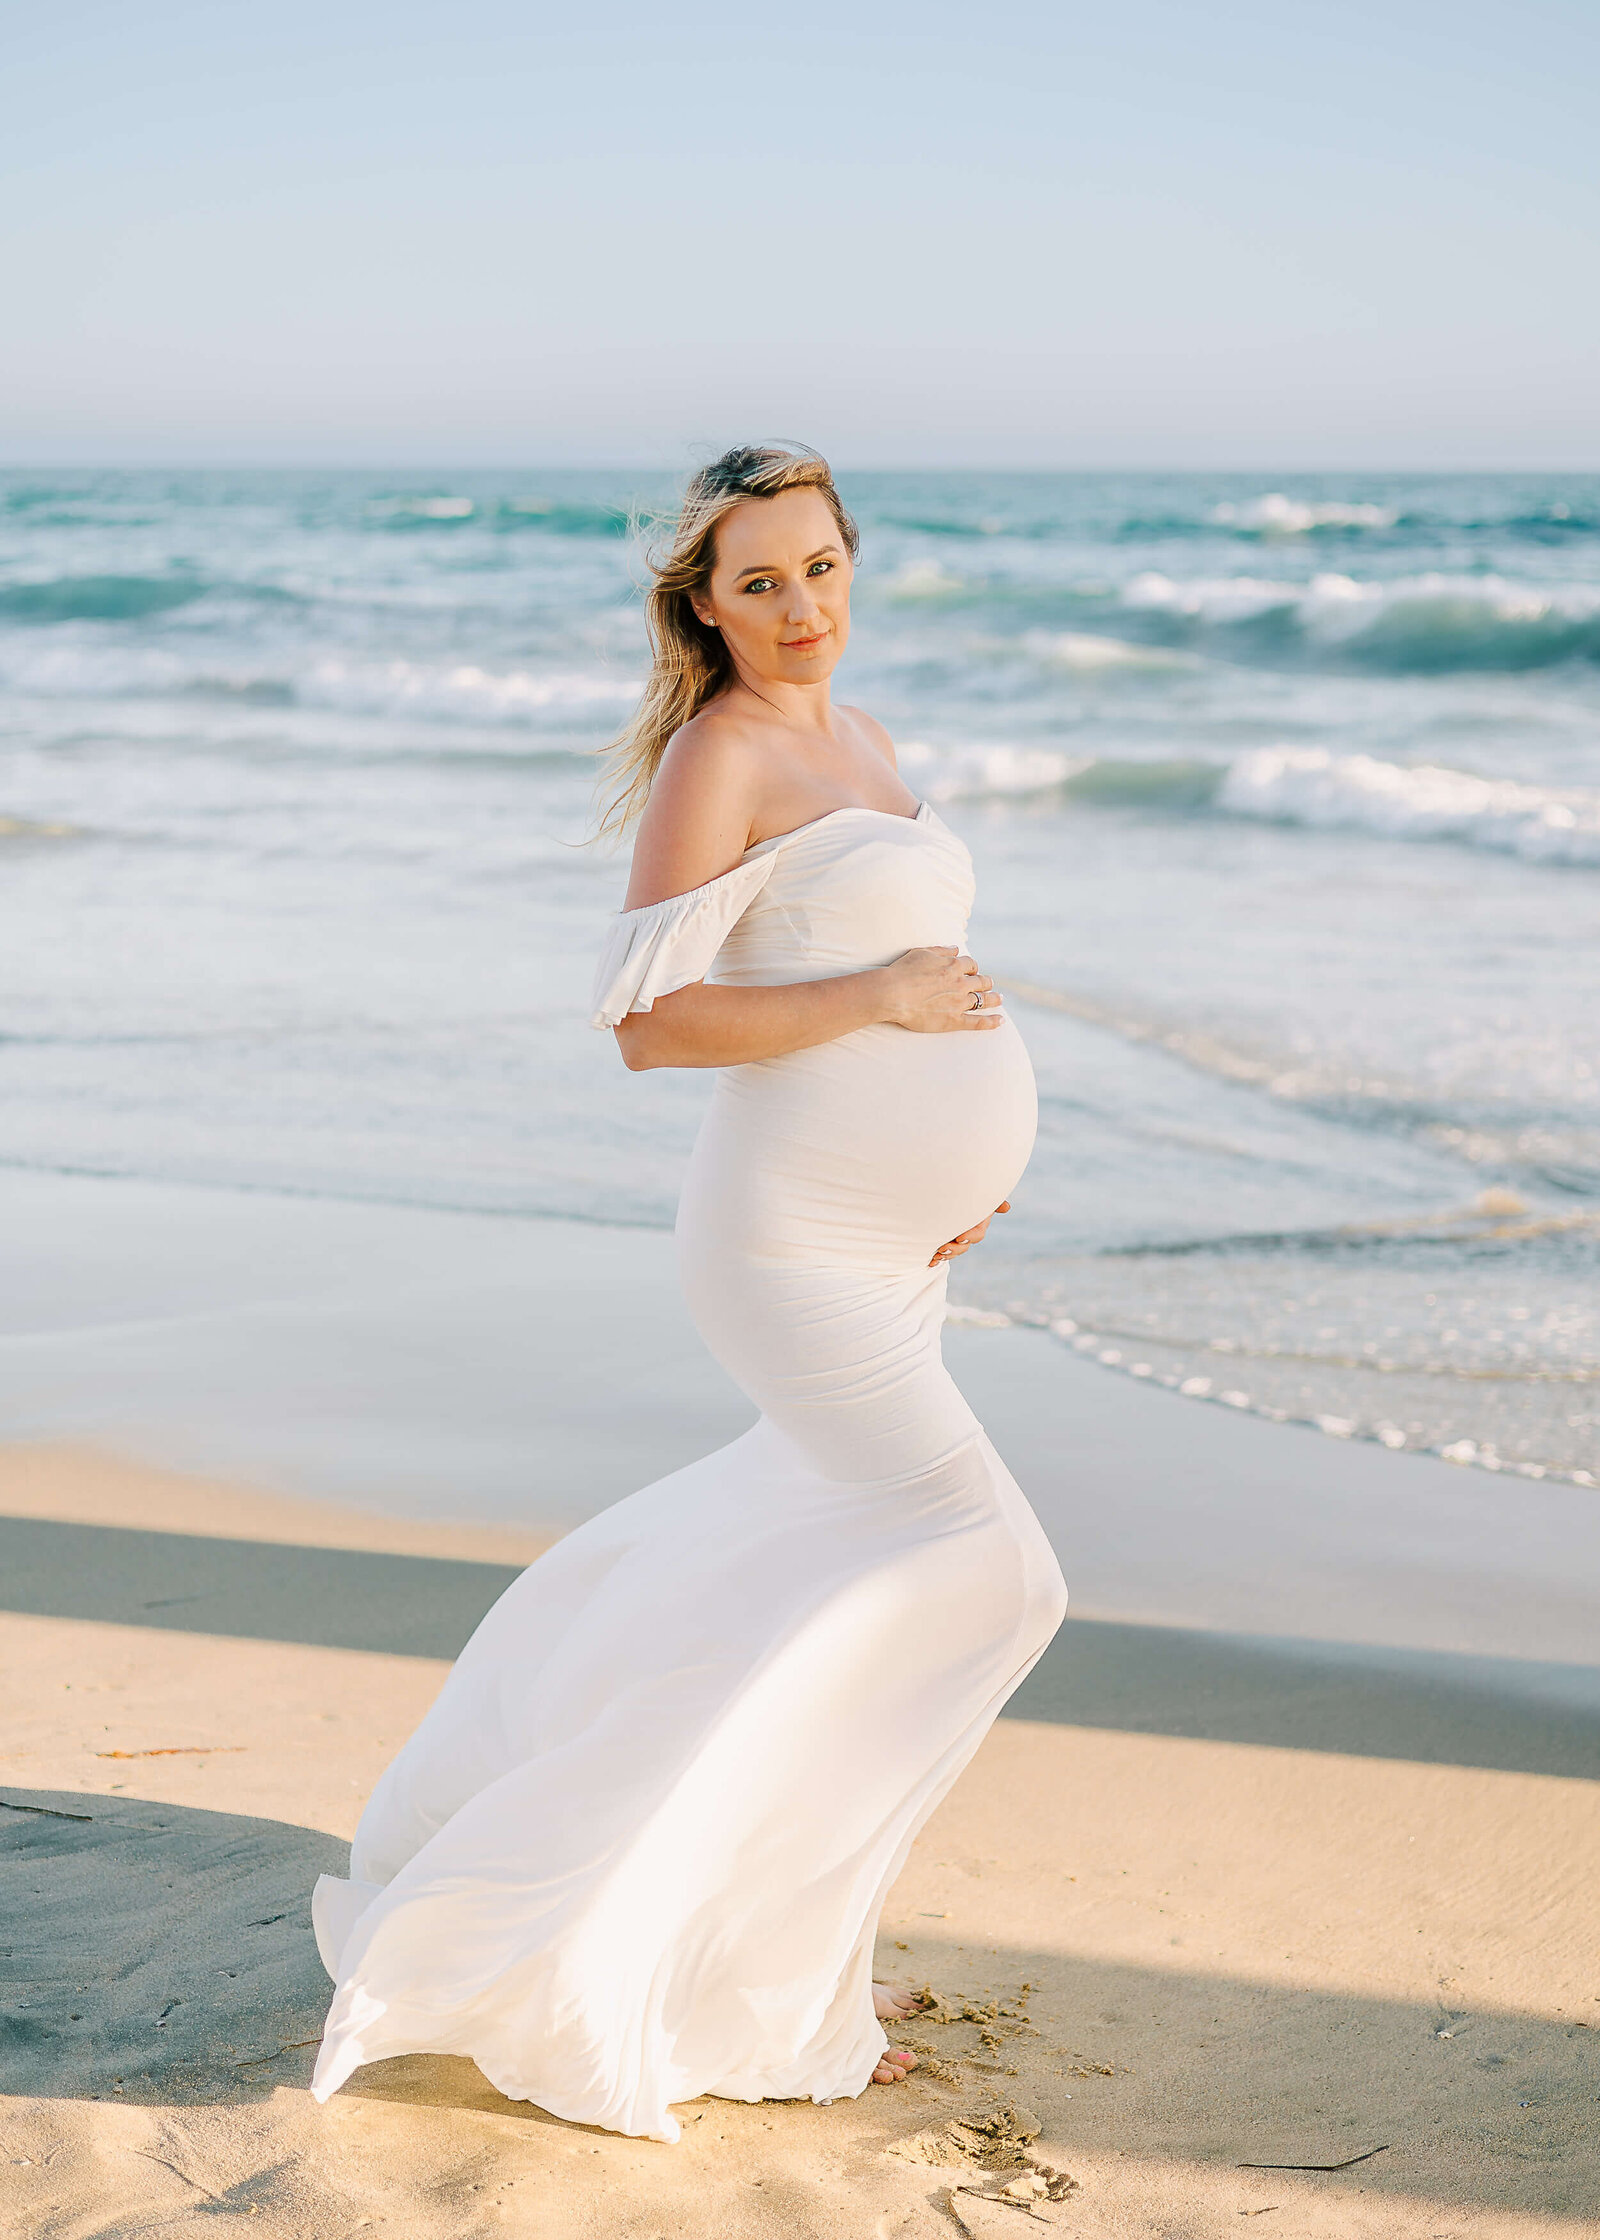 Gorgeous expectant mom standing holding baby bump on beach in Orange County, CA by Ashley Nicole.